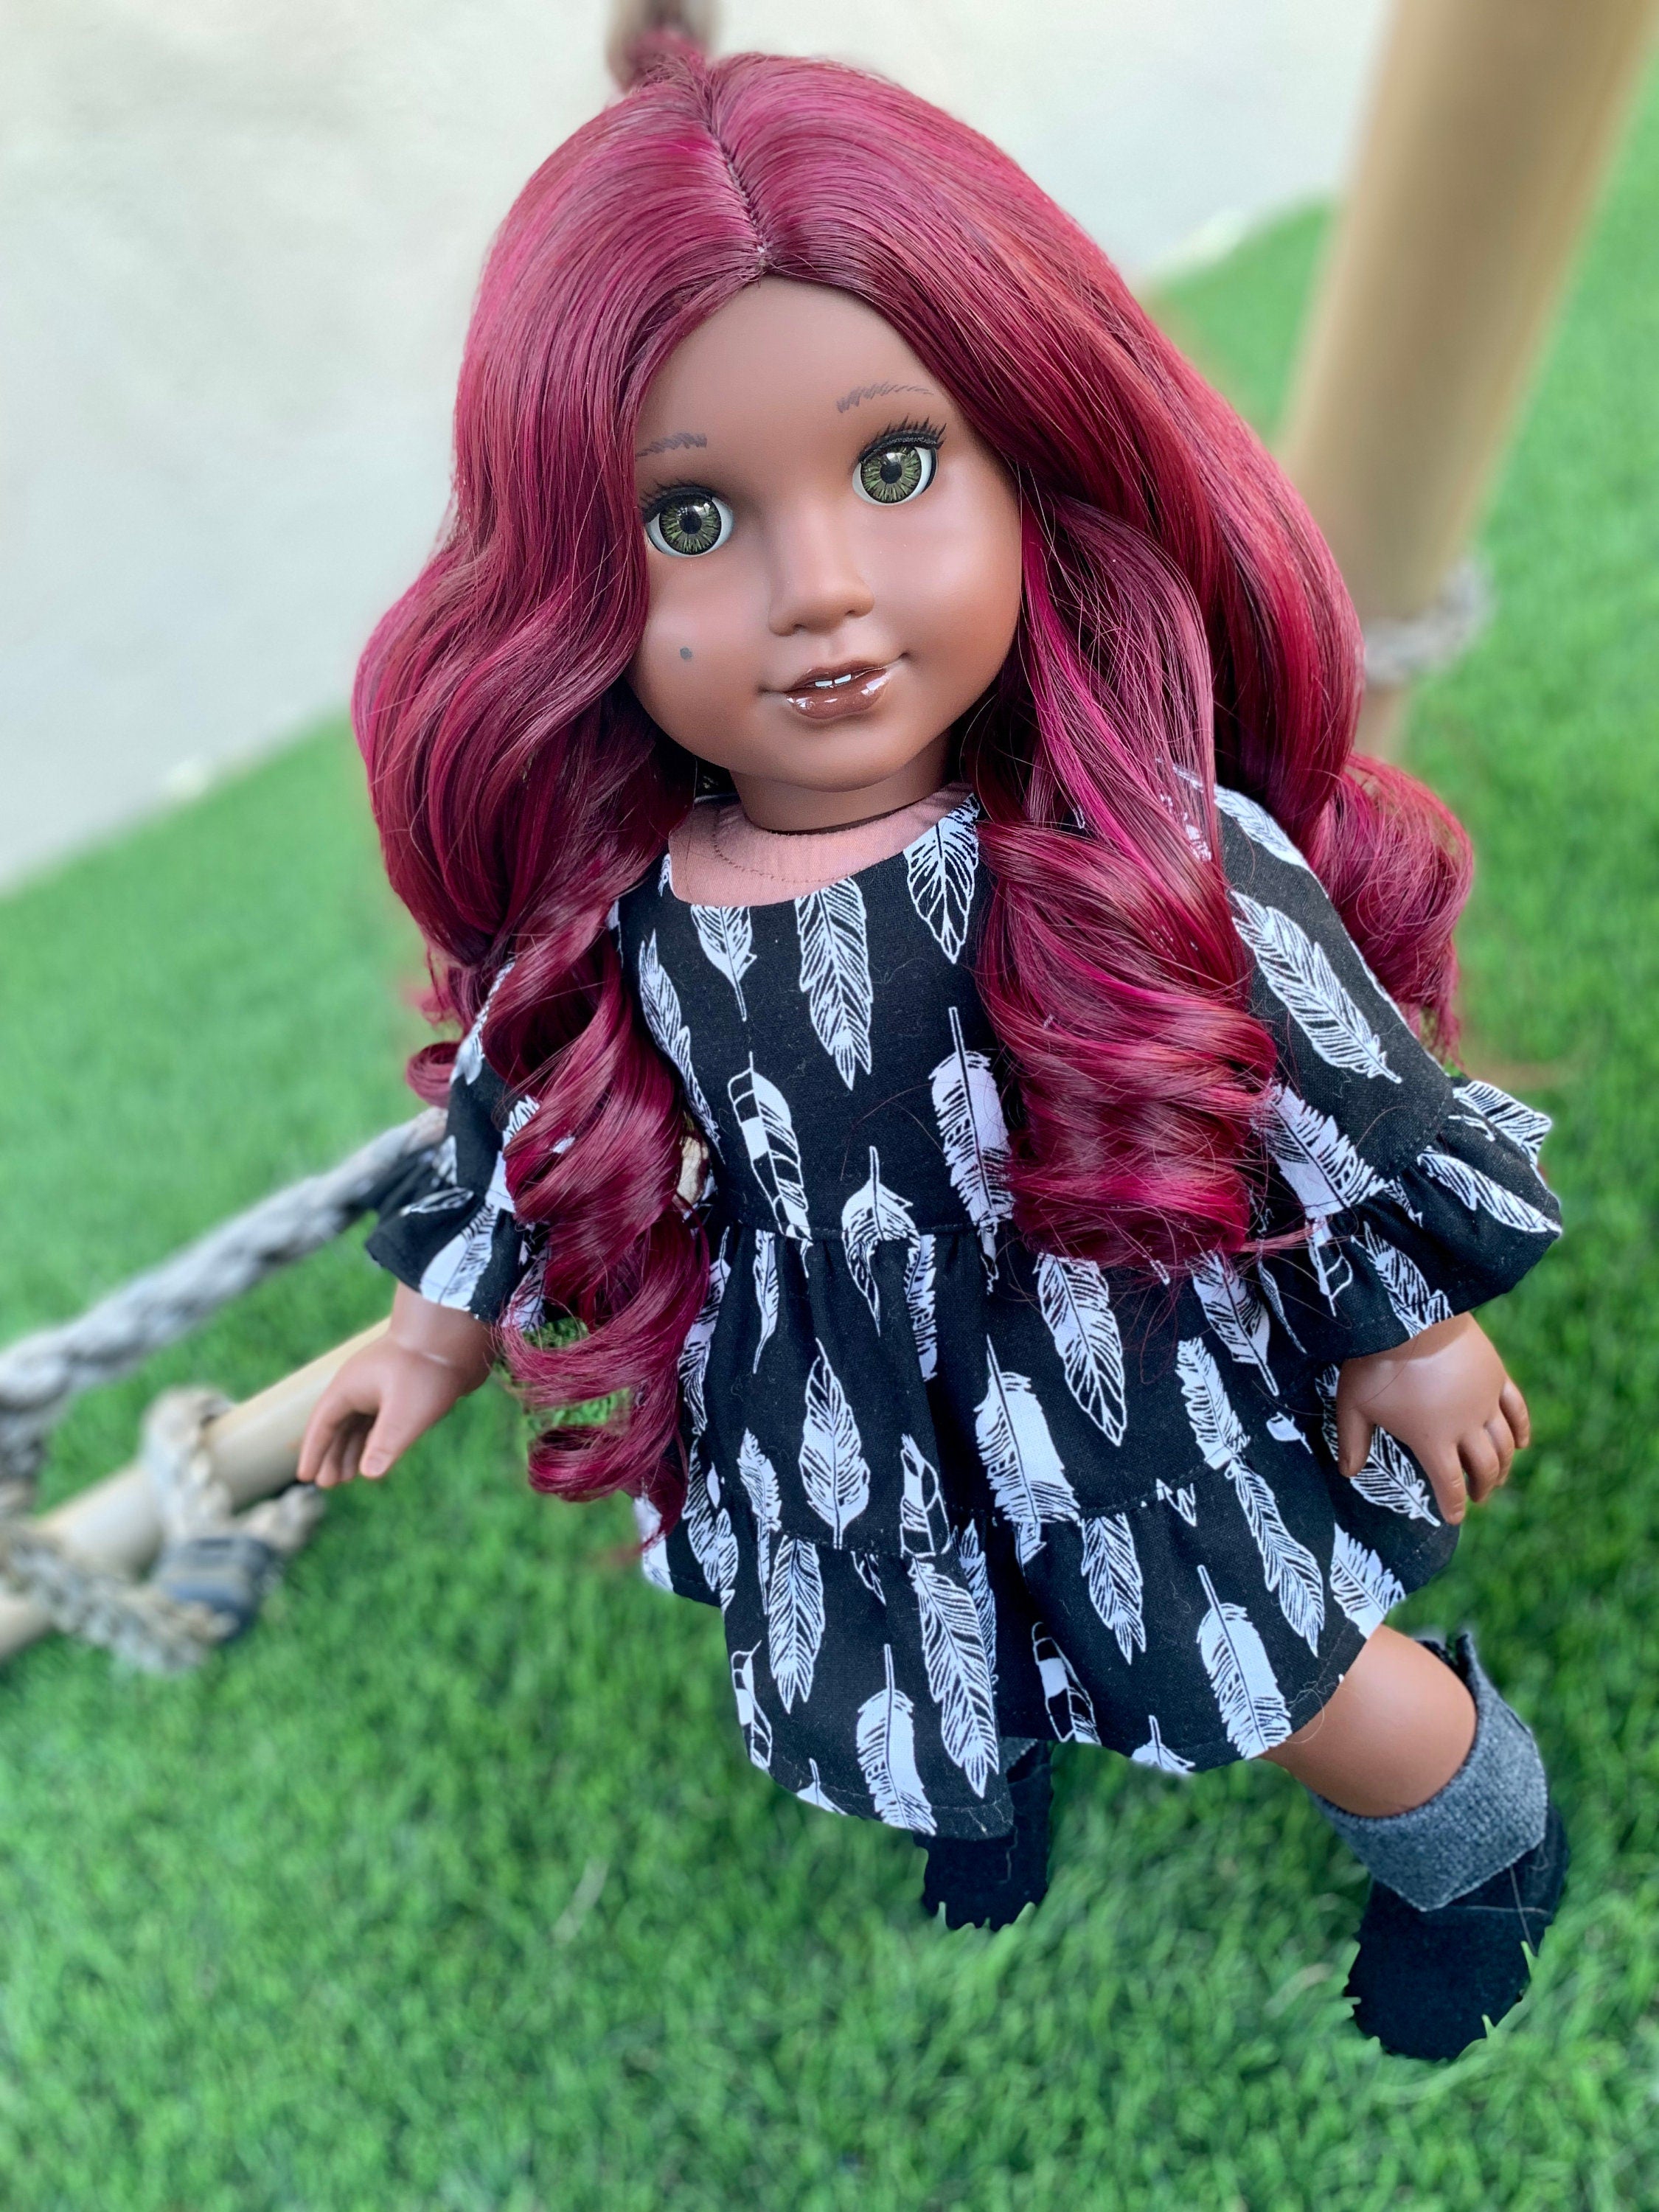 Custom doll wig for 18" American Girl Dolls - Heat Safe - Tangle Resistant - fits 10-11" head size of 18" dolls Our Generation Journey Gotz